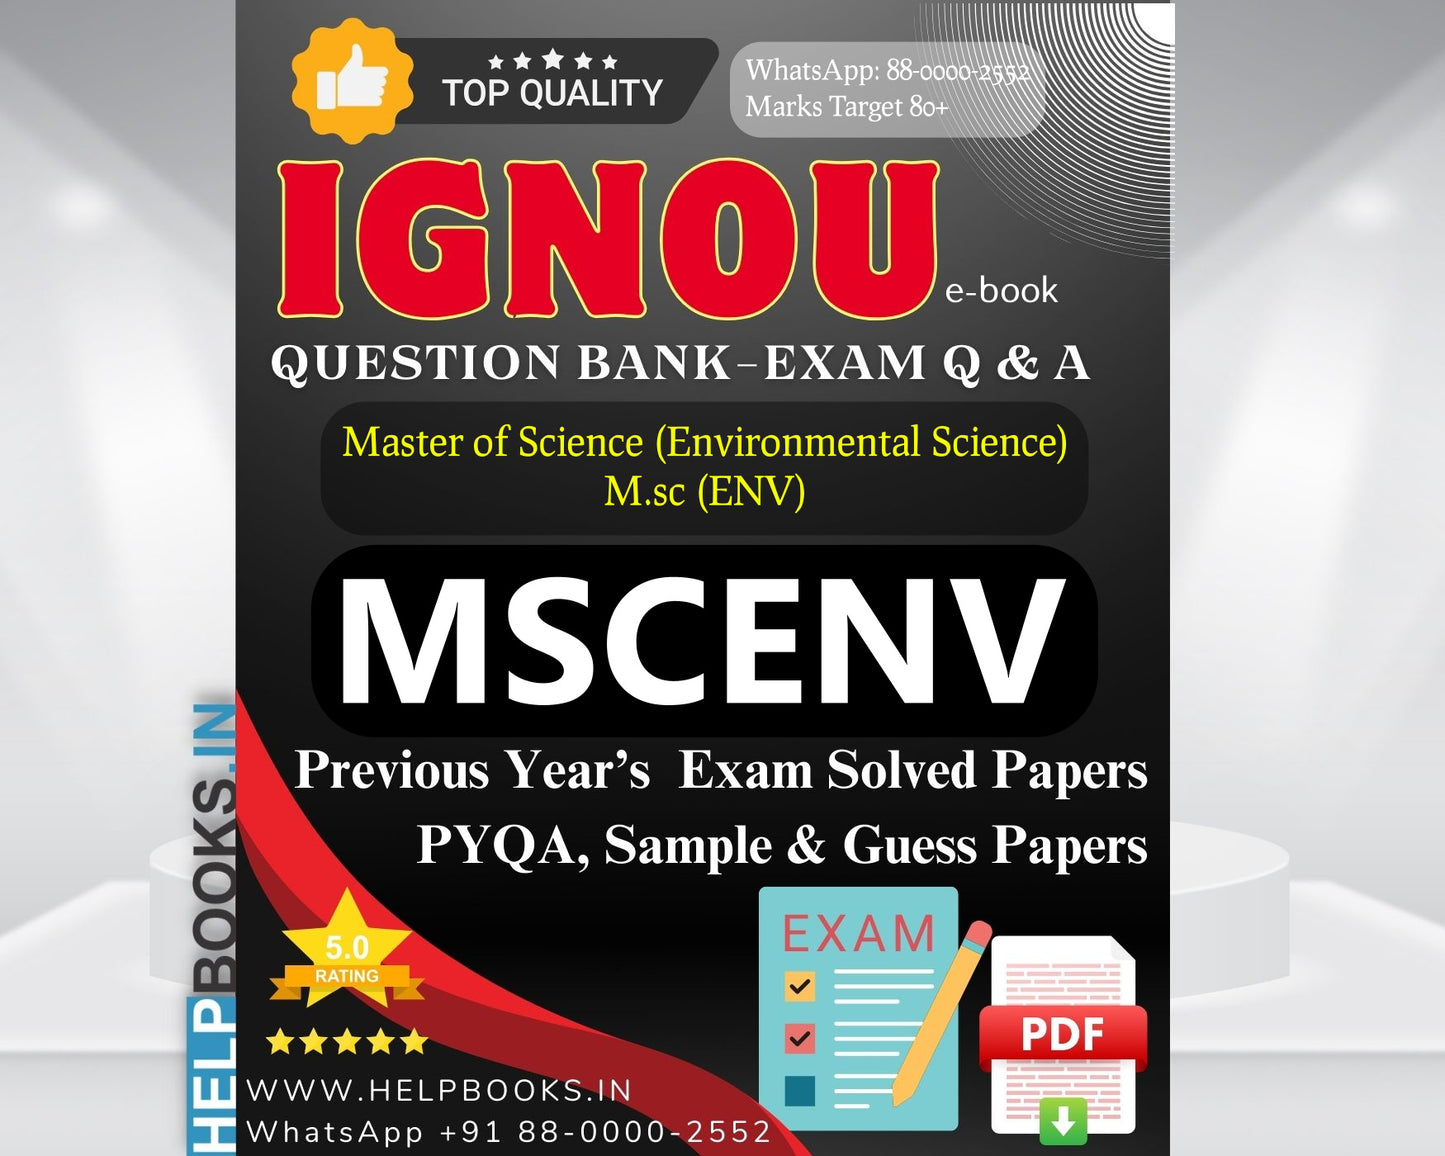 MSCENV IGNOU Exam Combo of 10 Solved Papers: 5 Solved Papers From Previous Years Exam & 5 Sample Guess Papers for Master of Science Environmental Science